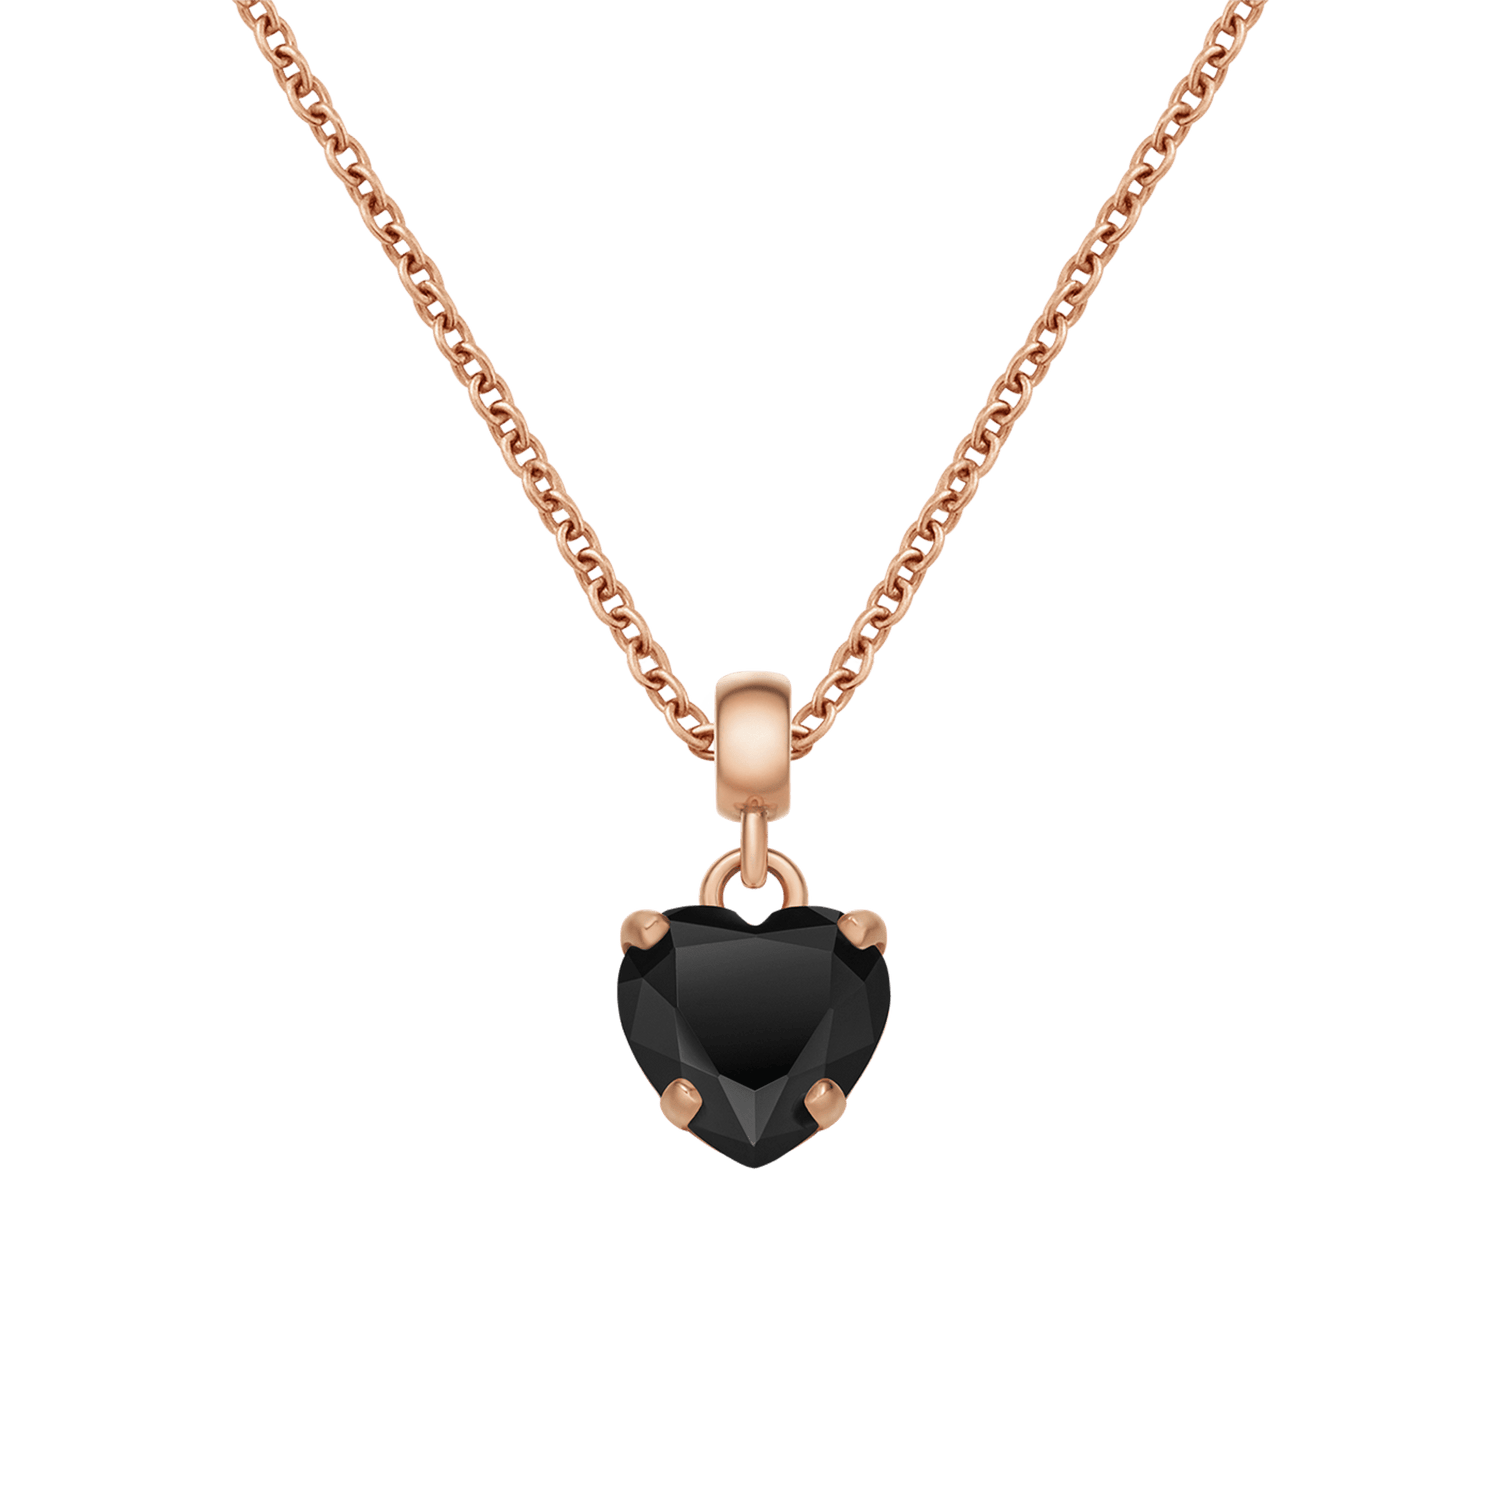 Heart Crystal Black Rose Gold Charm + Chain Necklace RG